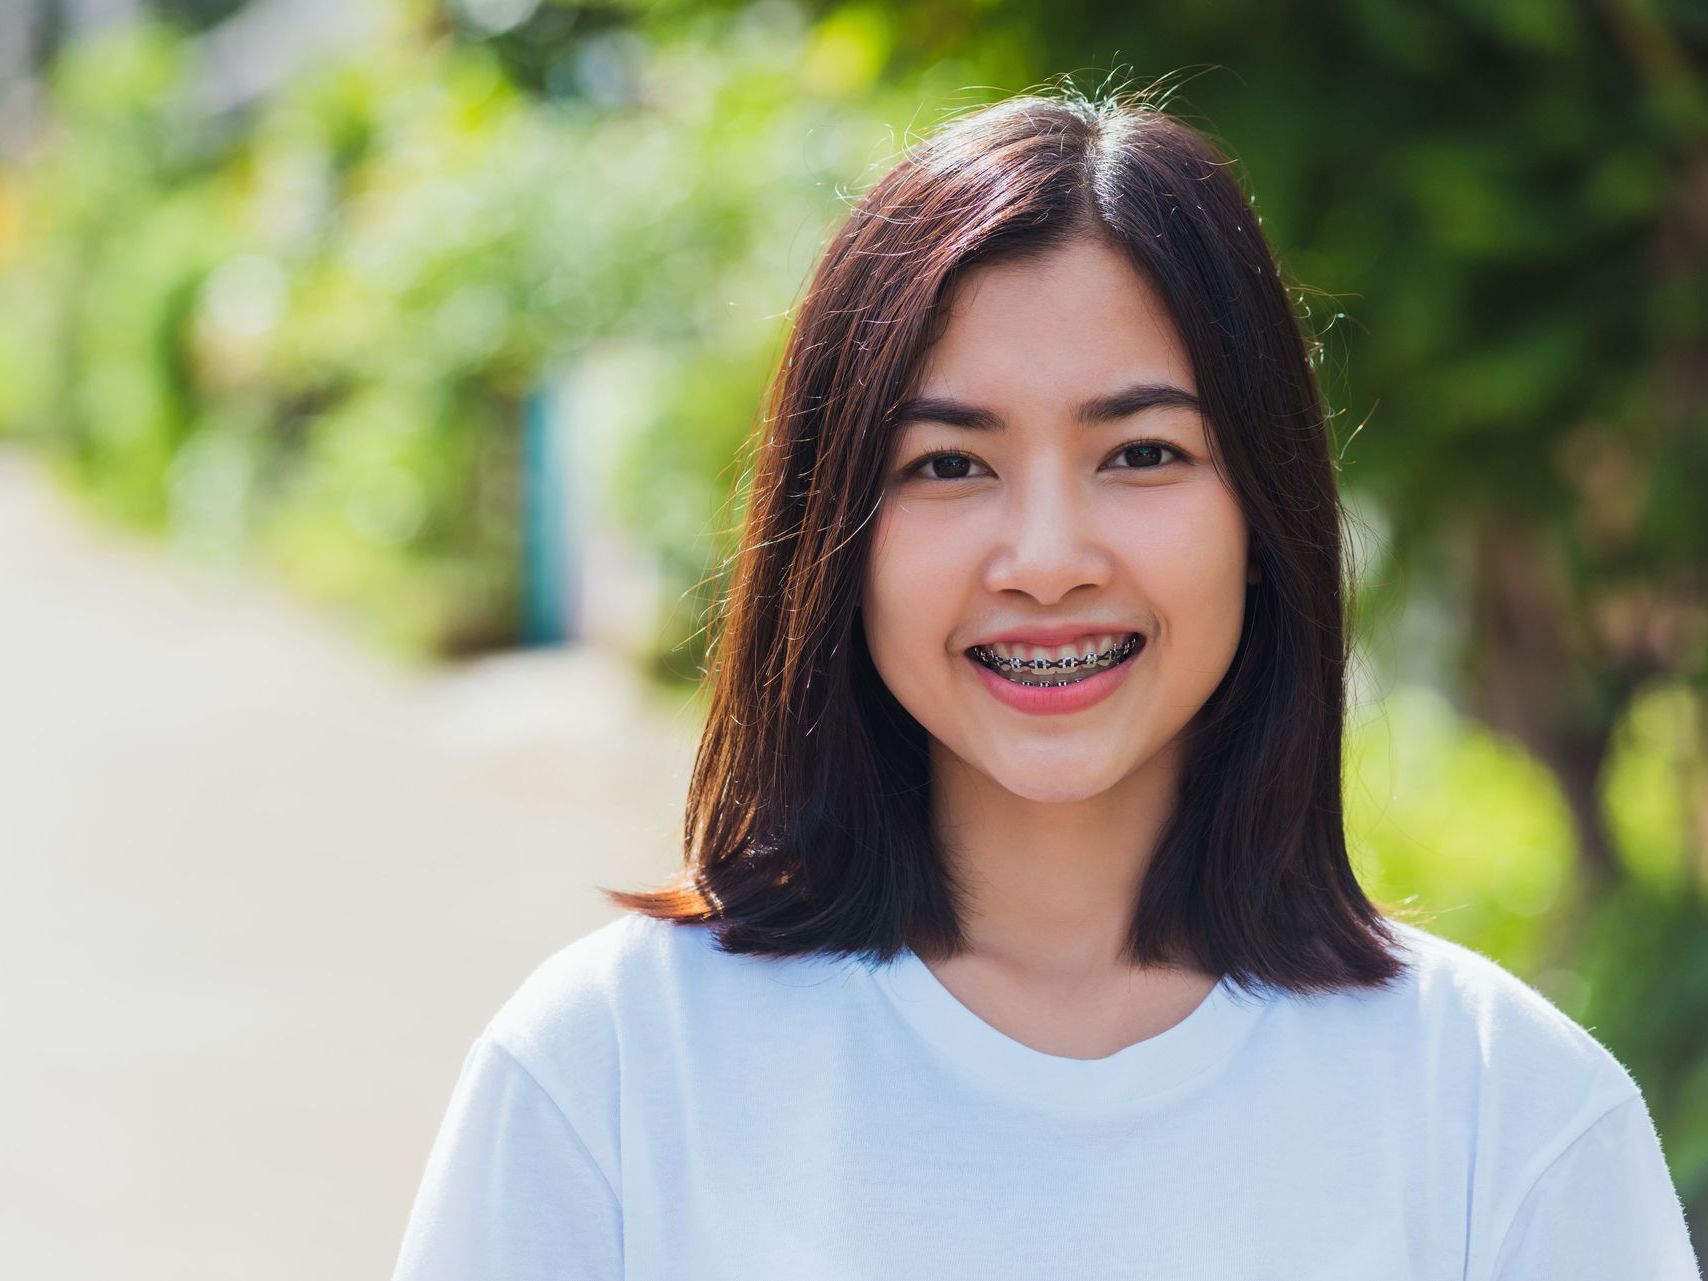 An image of a young Asian girl with braces standing outside